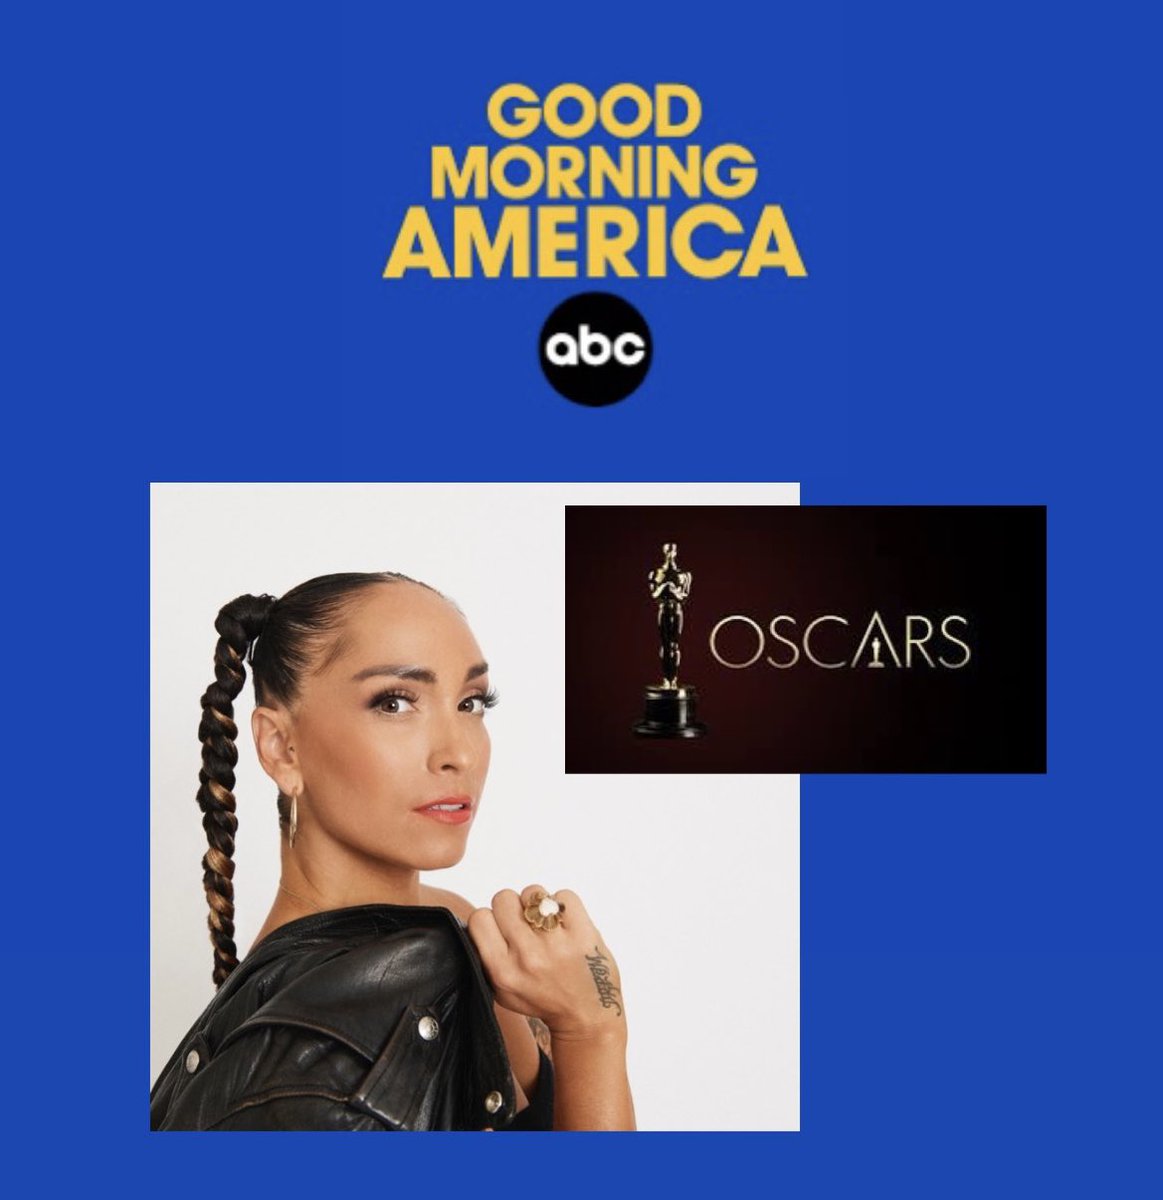 Let's get red carpet ready 🎞 Tune in to @goodmorningamerica tomorrow 2/26 at ~8:45am EST for a fun fitness x Oscars segment ✨ abc.com/shows/oscars/n…